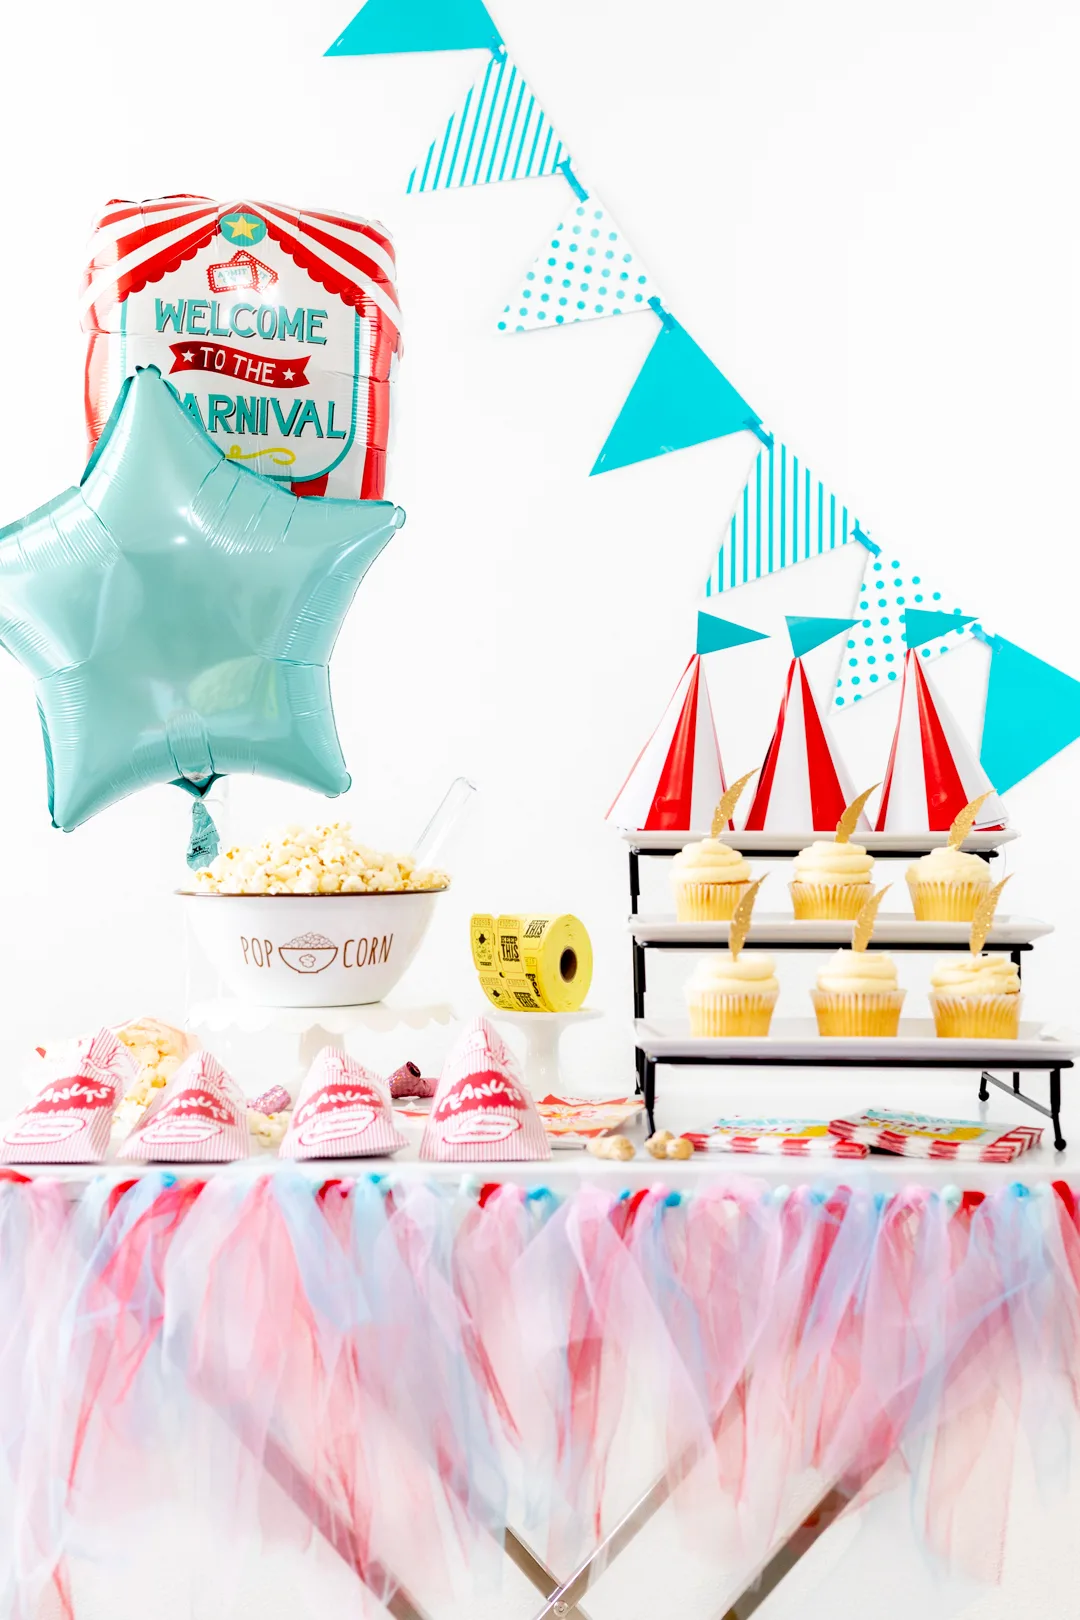 Carnival party ideas to celebrate the release of the Dumbo movie.